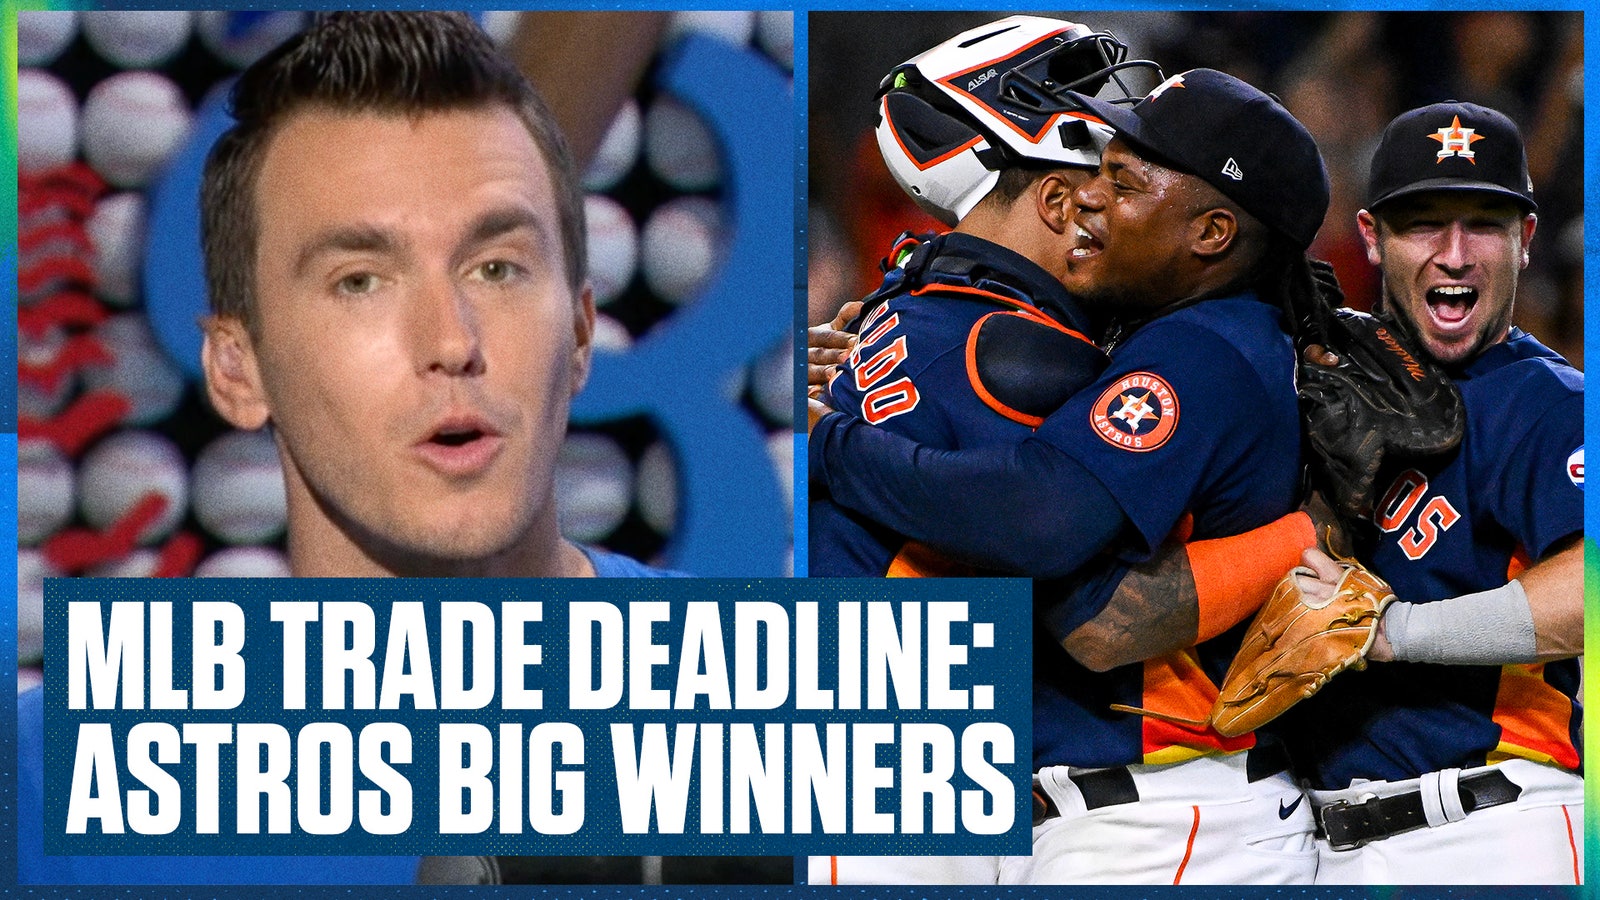 MLB Trade Deadline: Houston Astros & Los Angeles Angels come out as BIGGEST winners